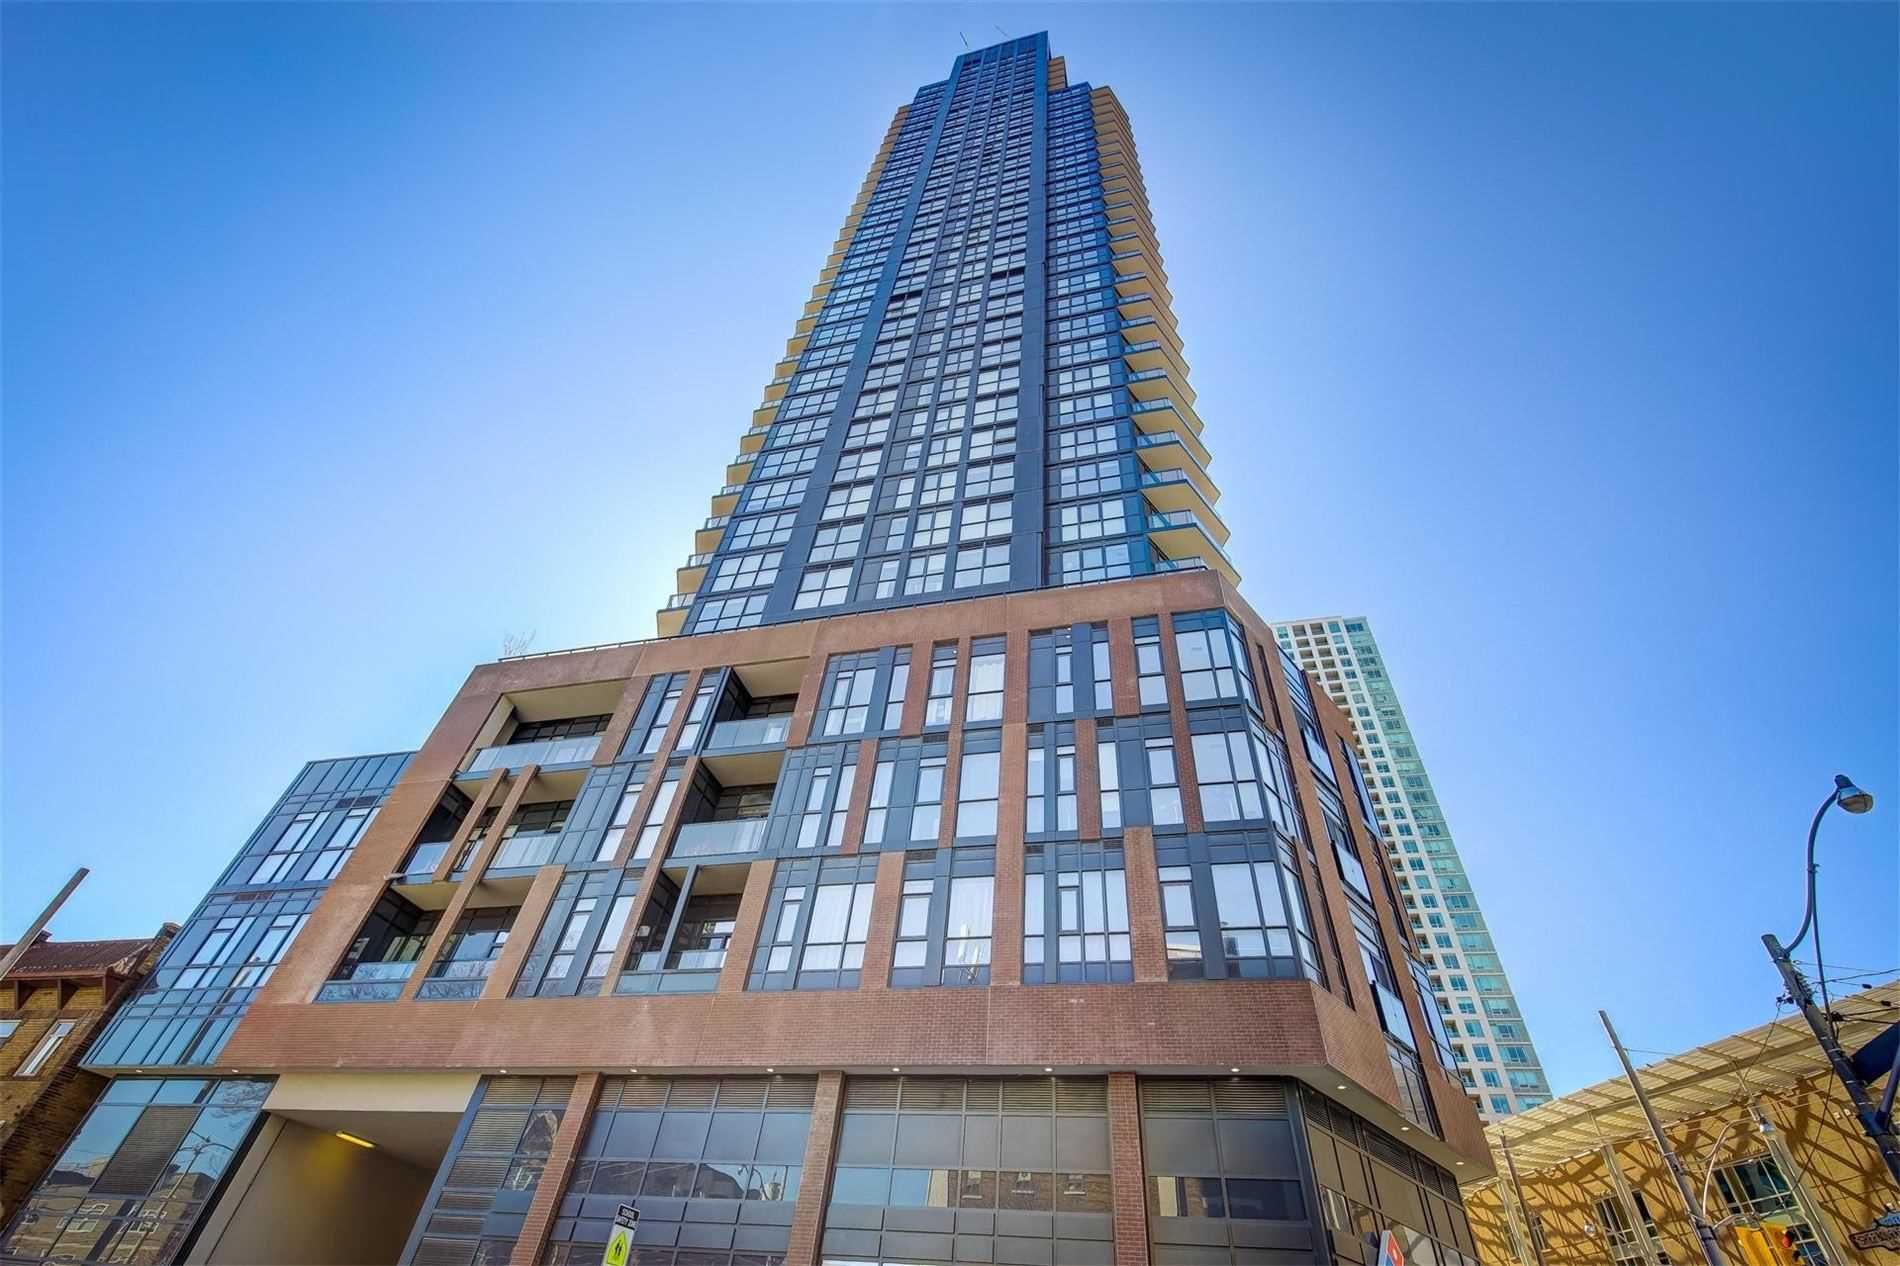 159 Wellesley St E. This condo at 159SW Condominium is located in  Downtown, Toronto - image #2 of 2 by Strata.ca